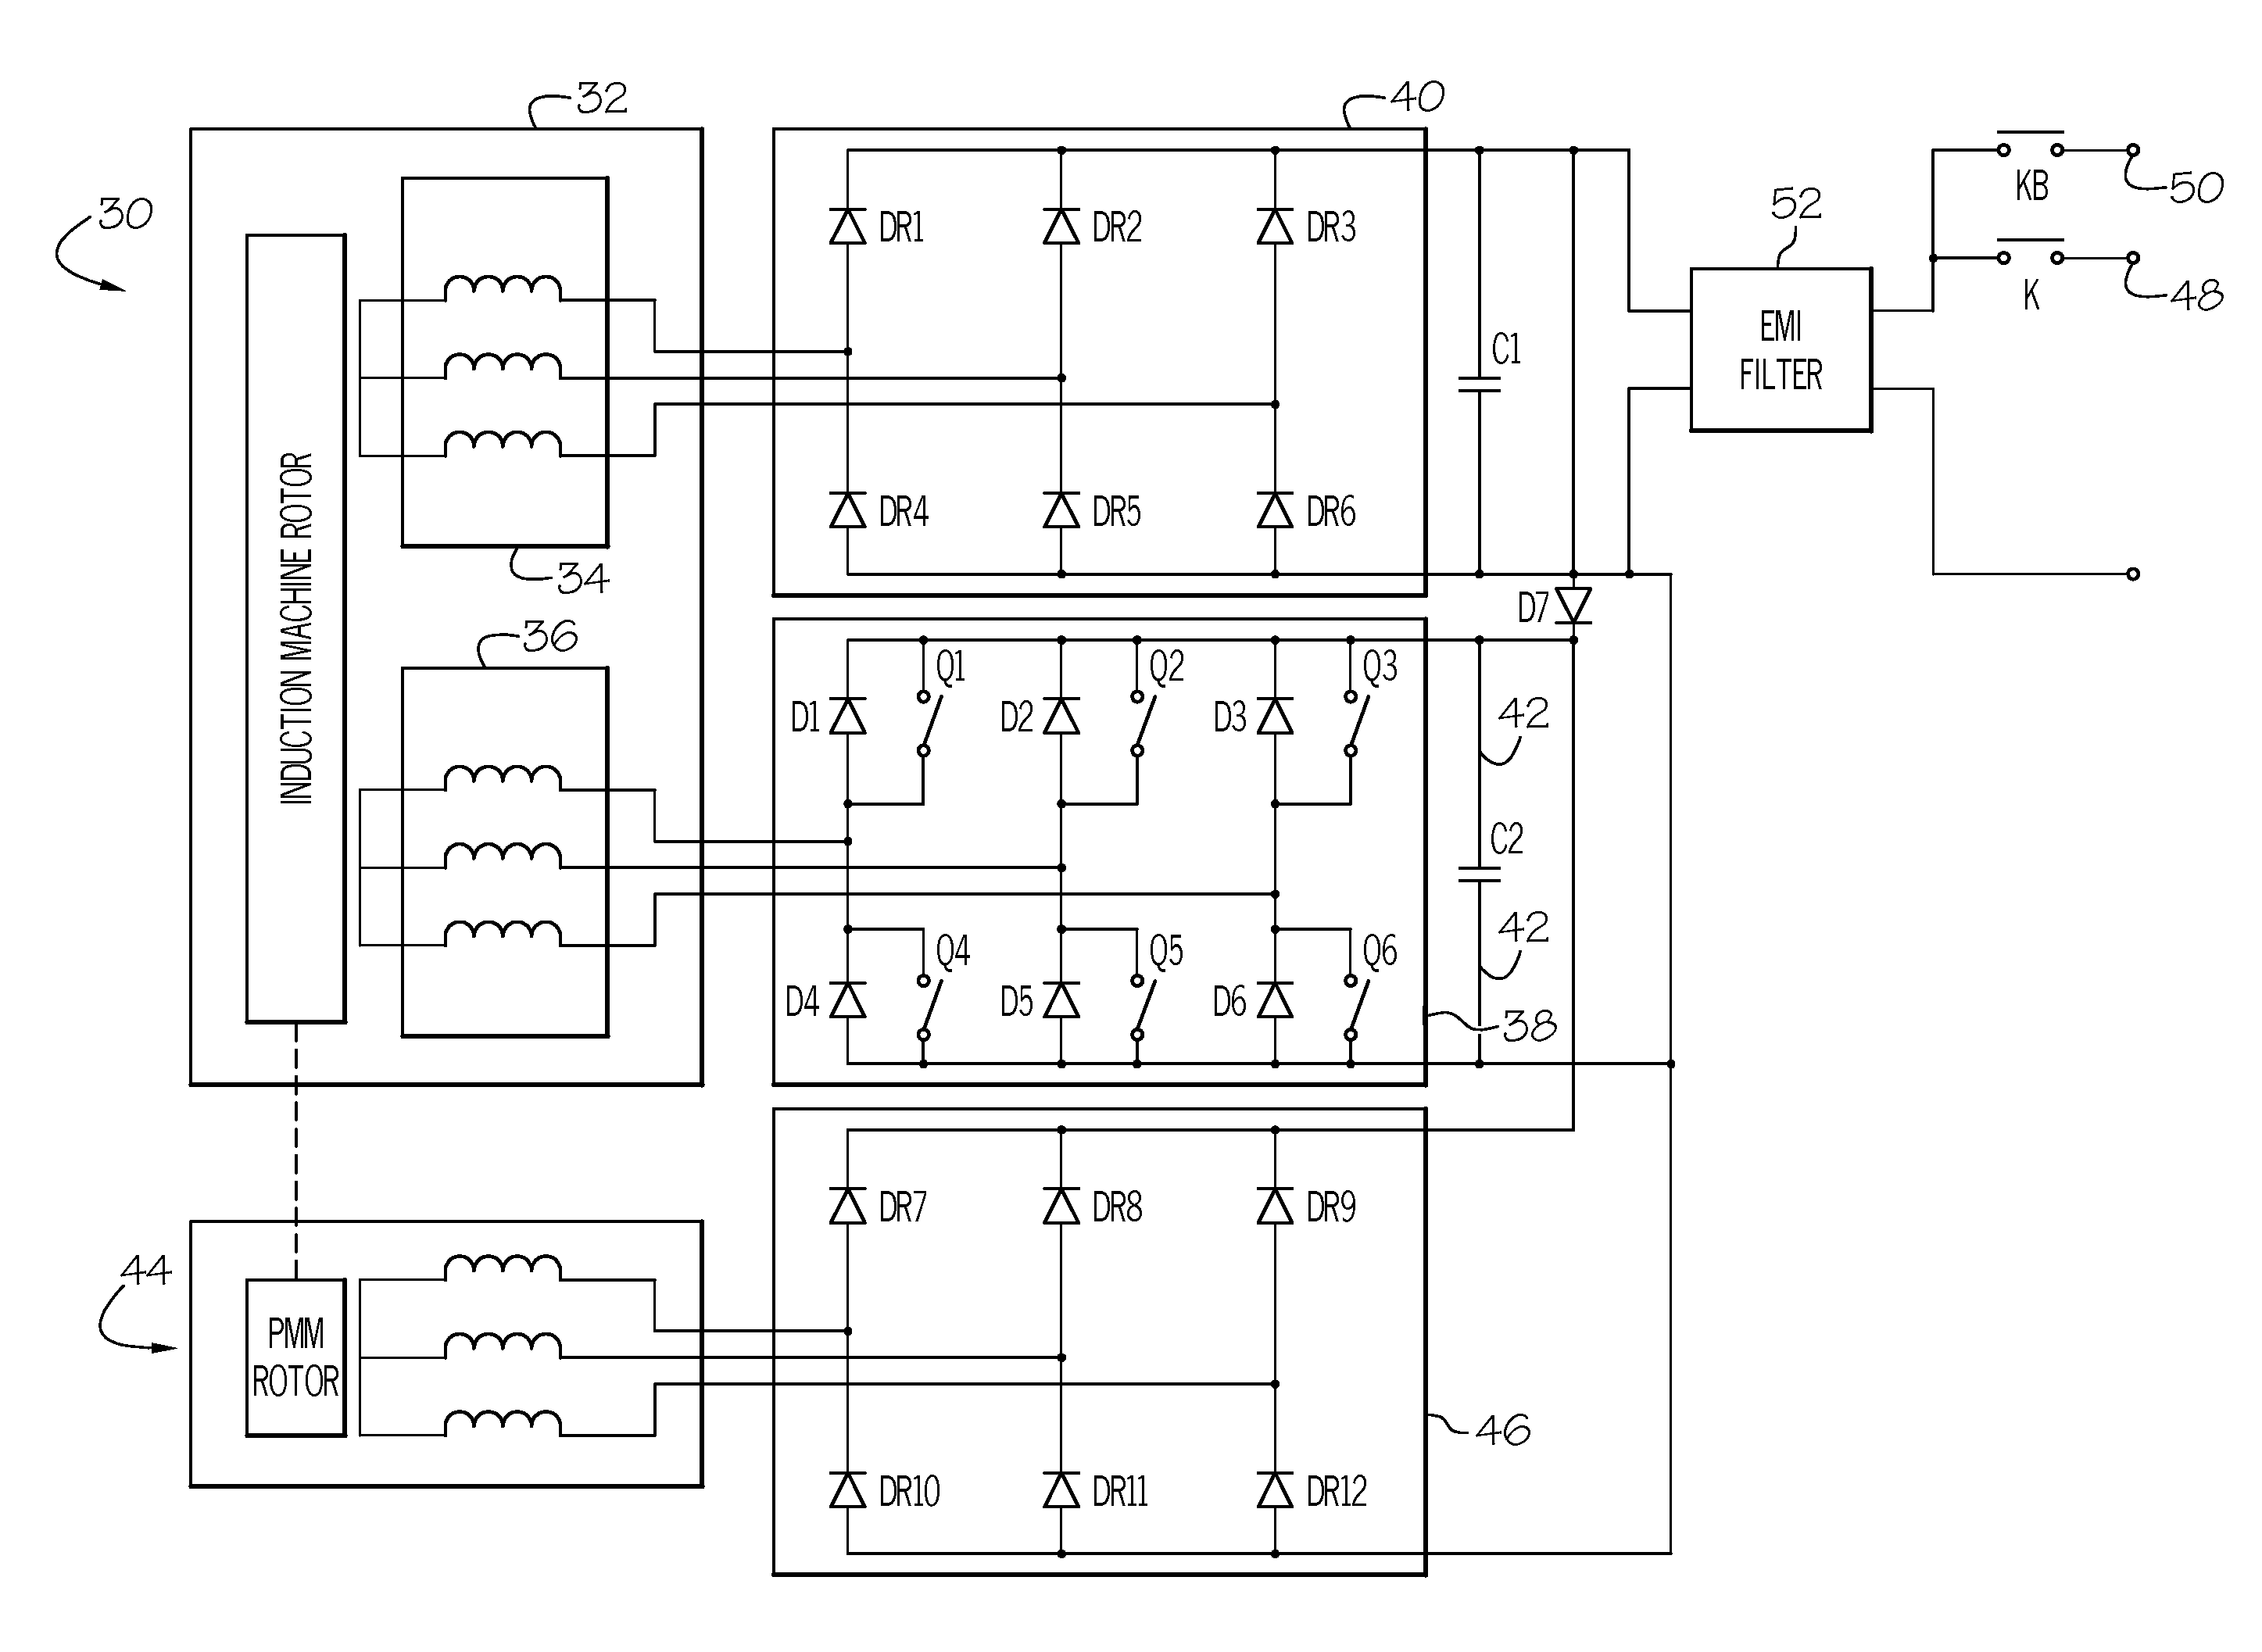 DC bus short circuit compliant power generation systems using induction machine